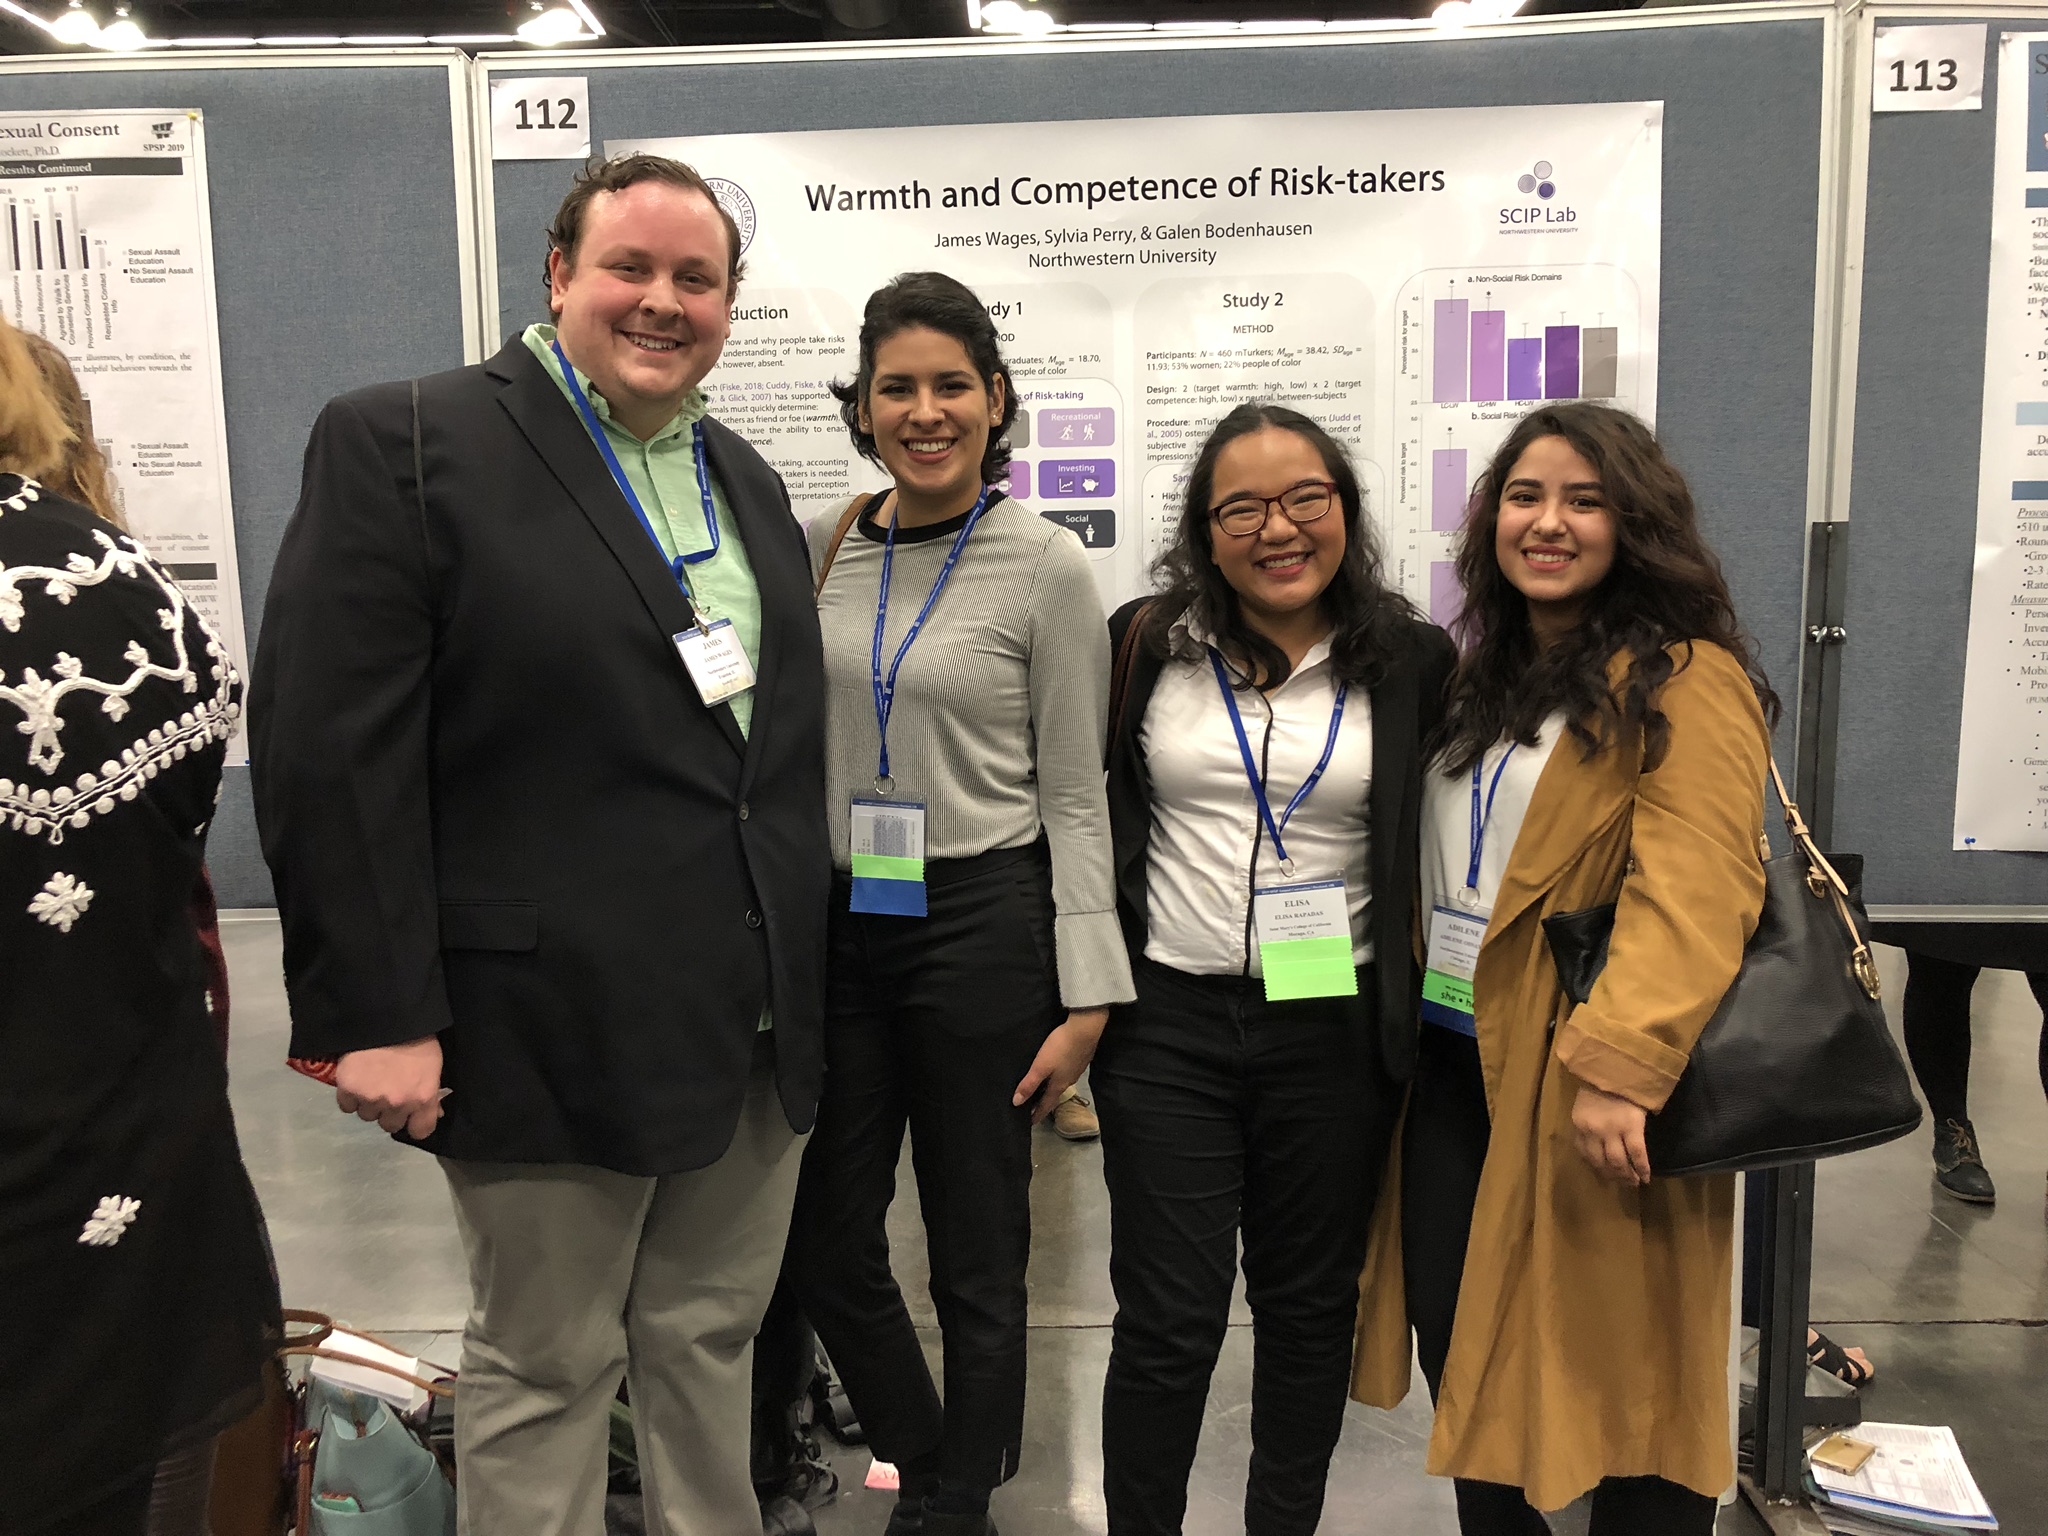 The SCIP Lab at SPSP 2019